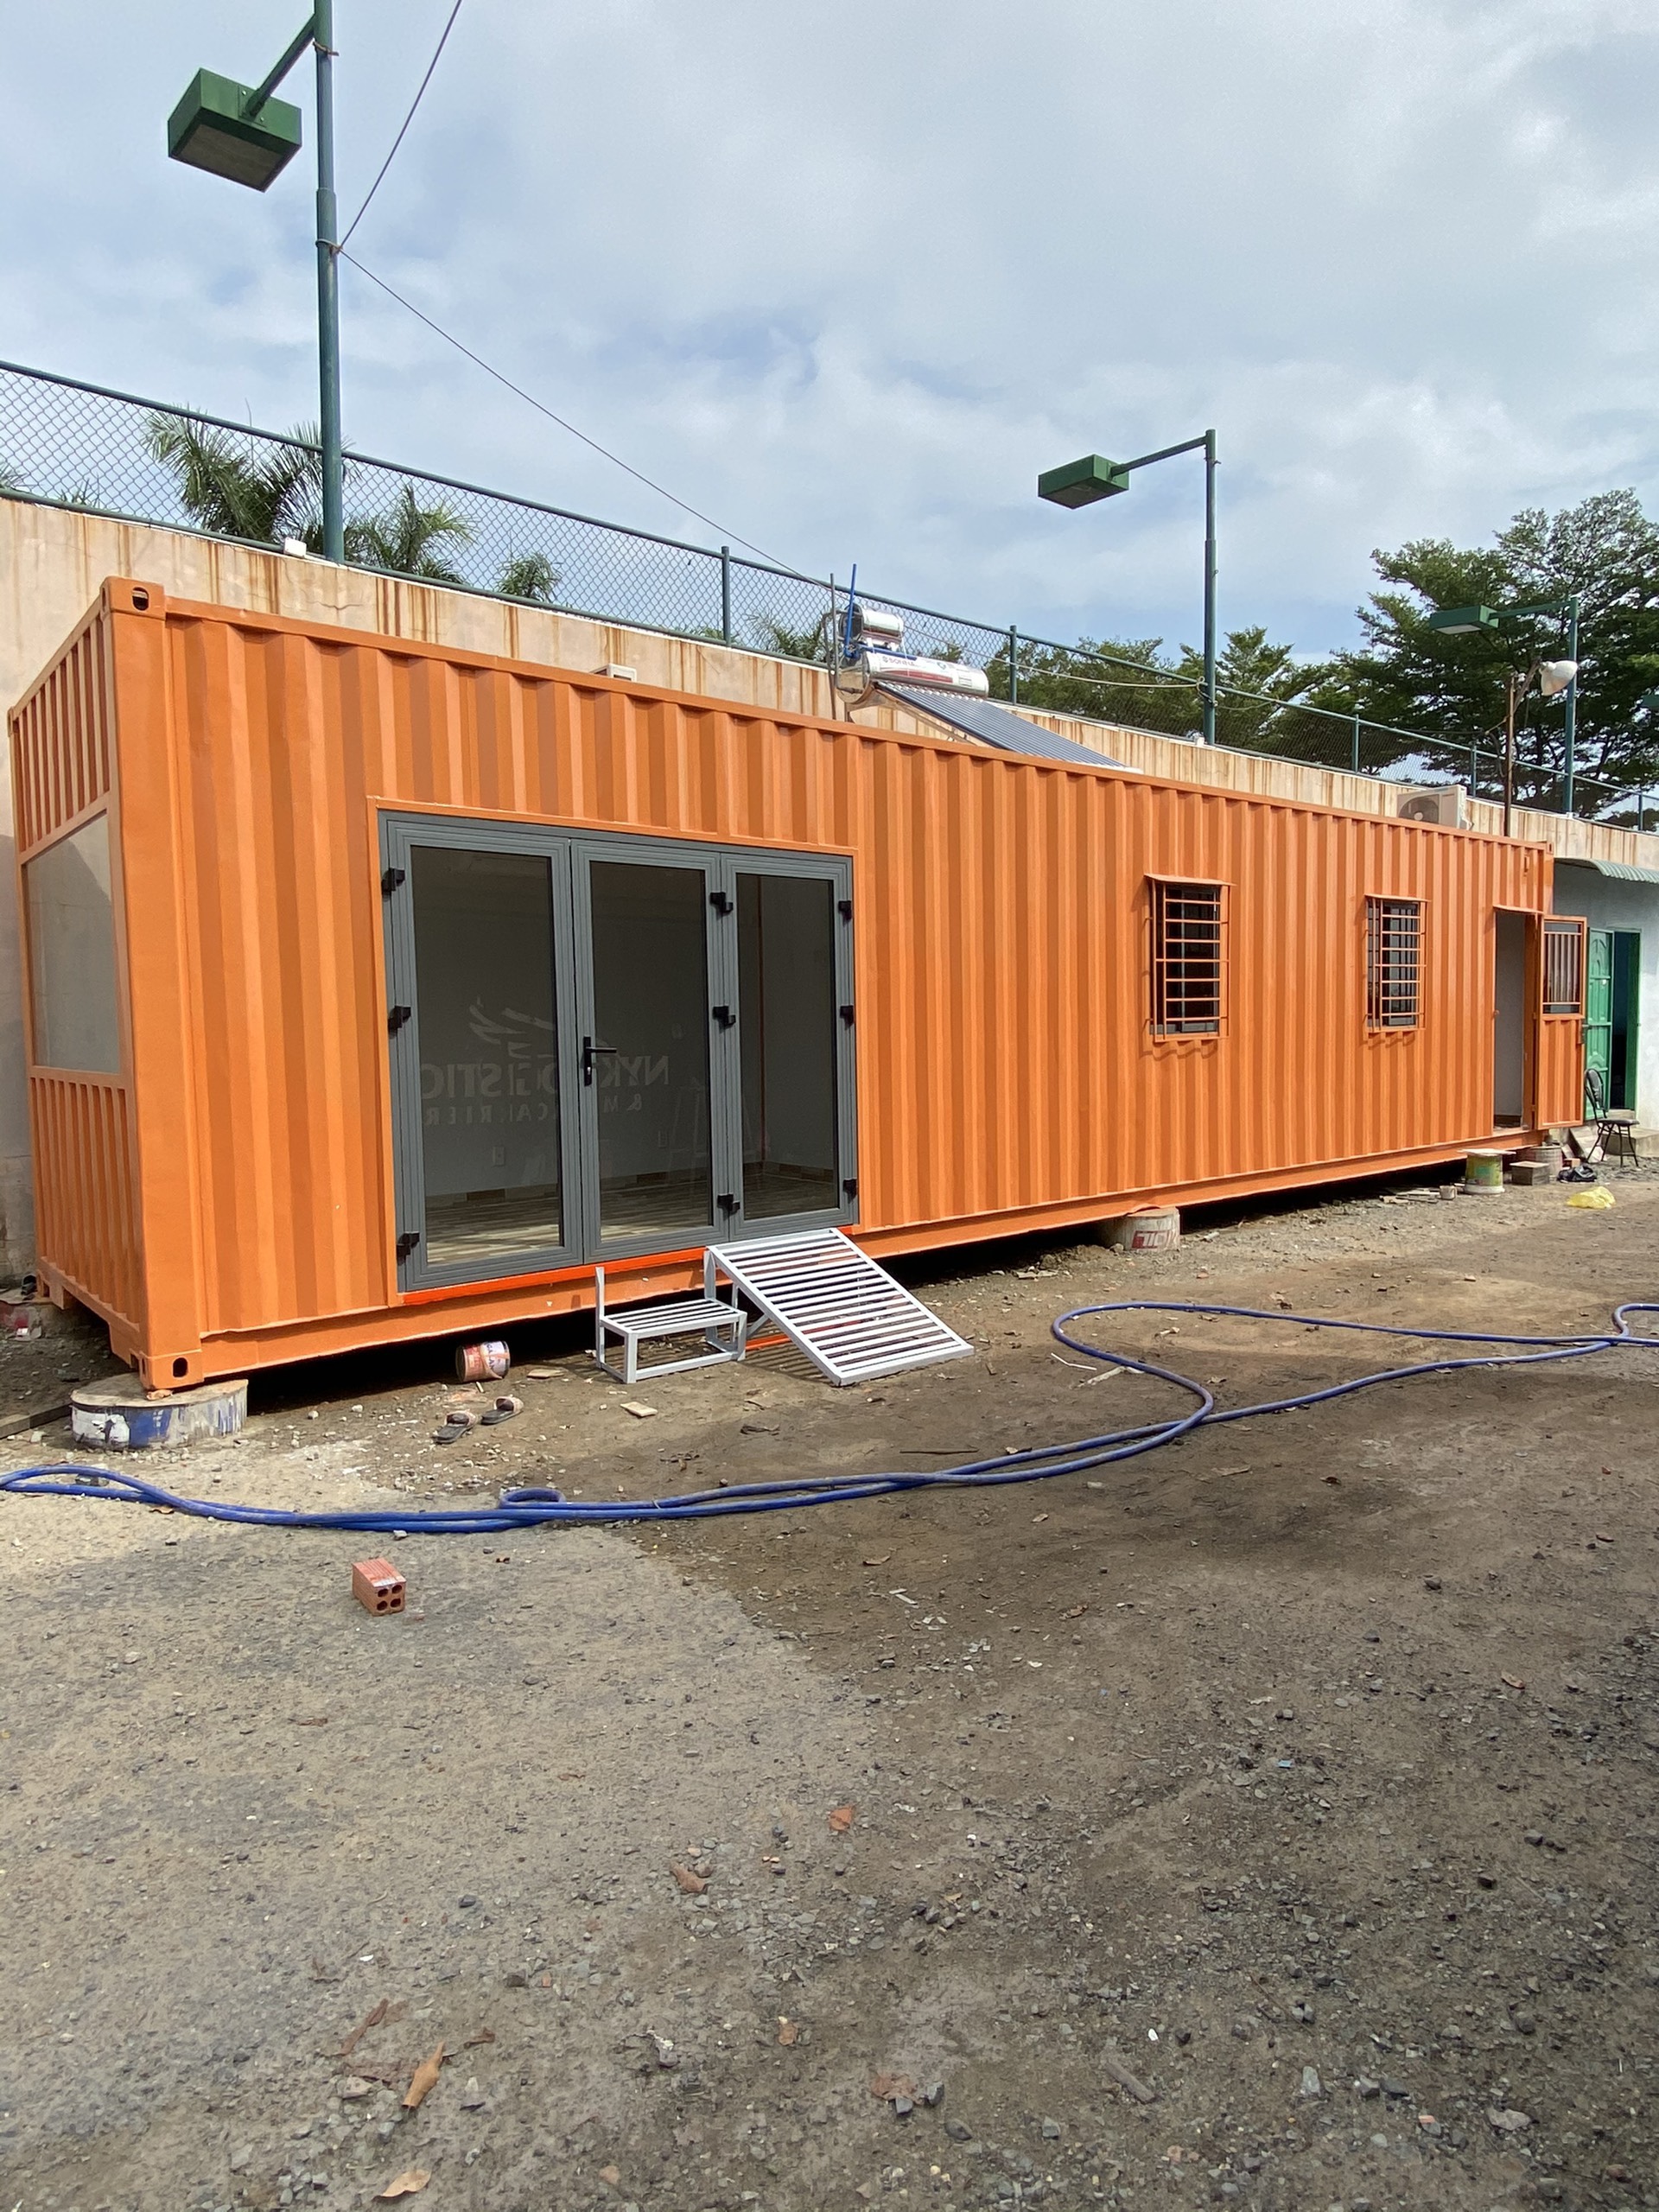 Container văn phòng - Container Thahoco - Công Ty TNHH Kỹ Thuật Dịch Vụ Thahoco